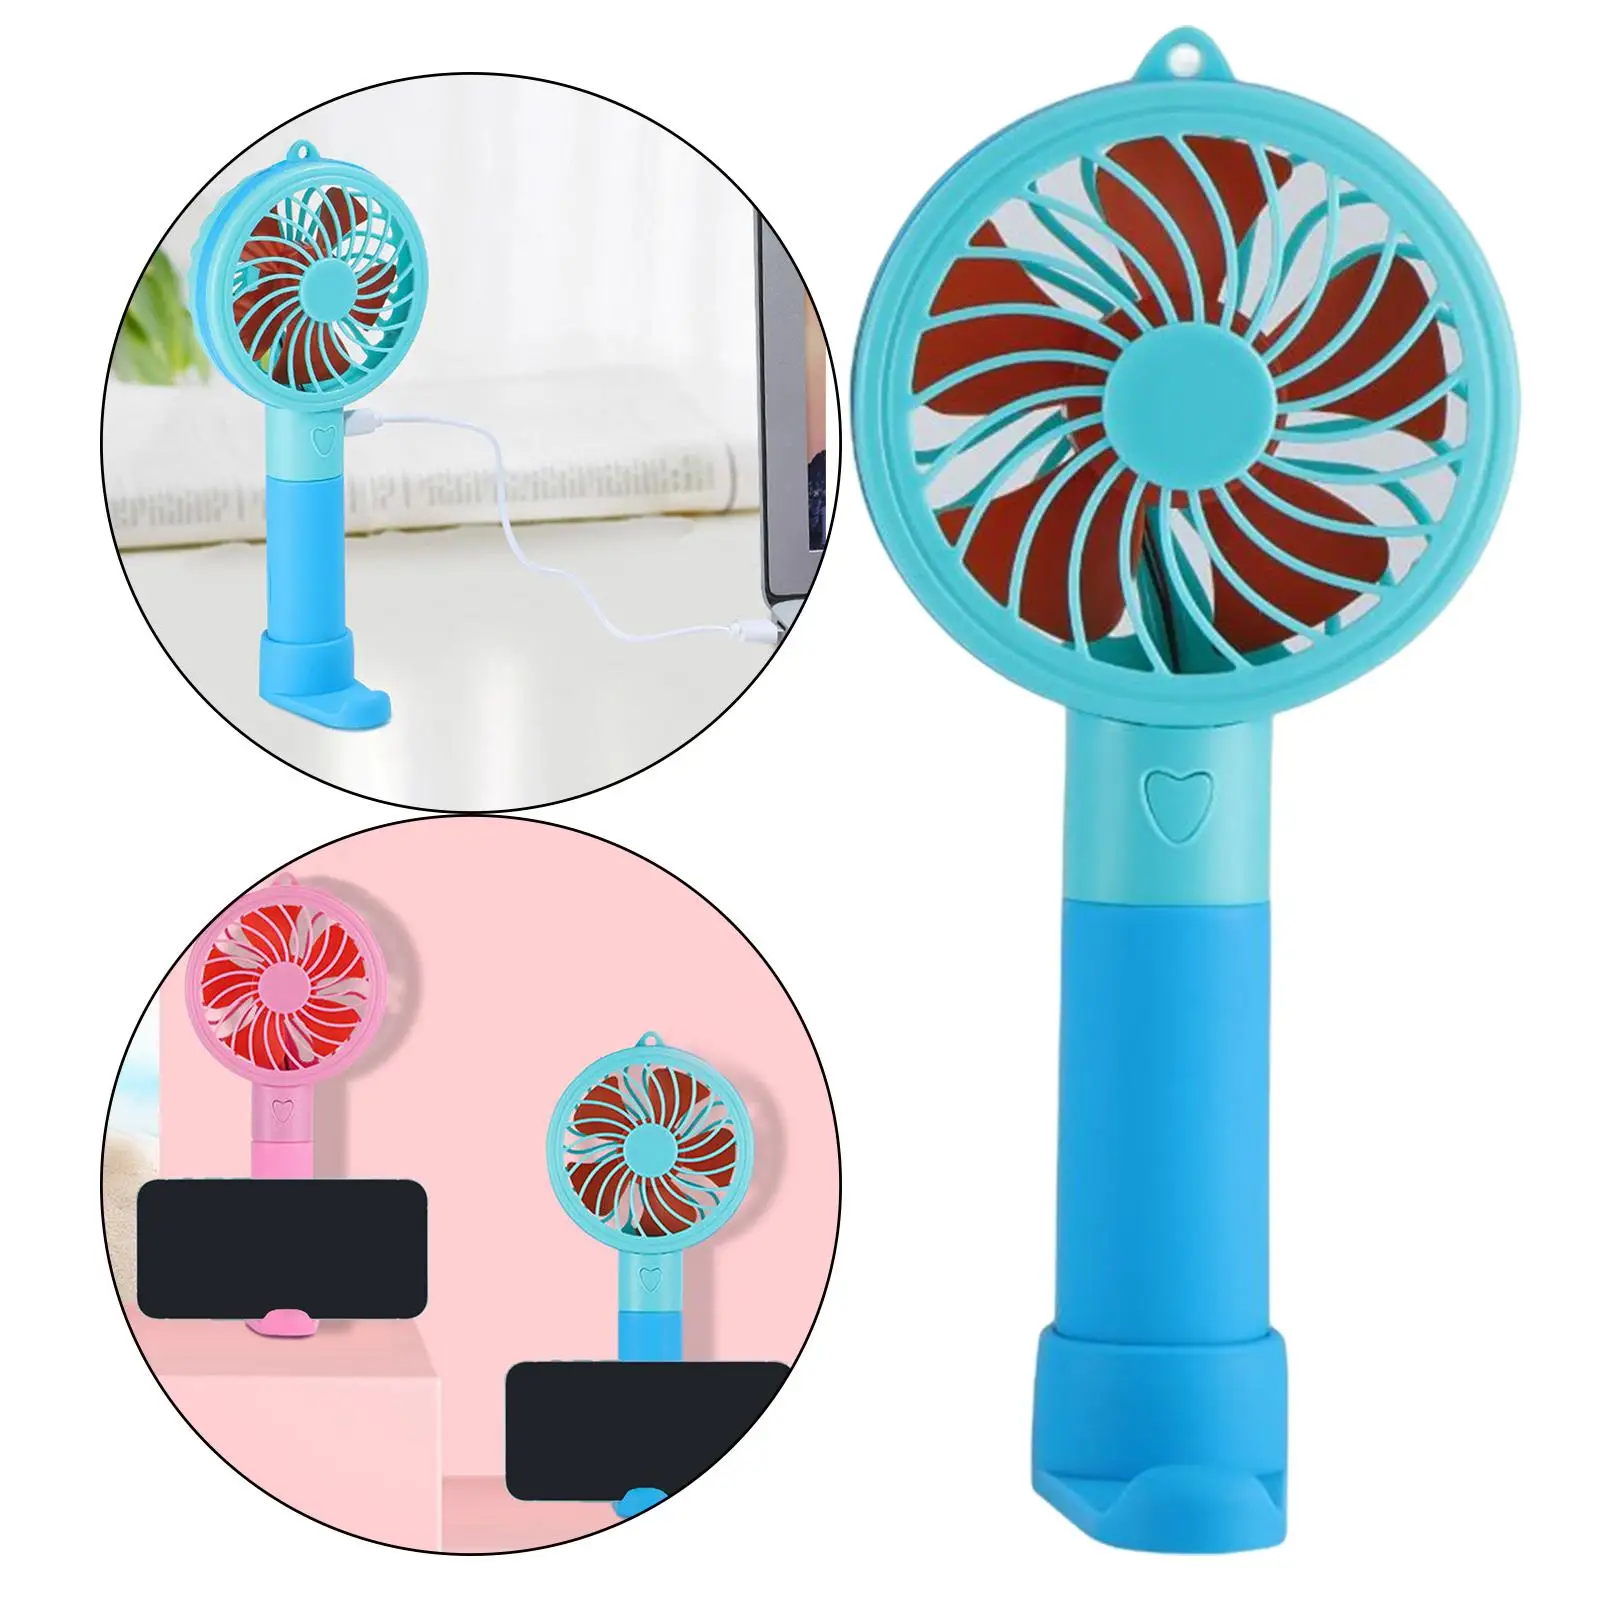 Portable Mini Hand-held Small Desk Fan Cooler Cooling USB Rechargeable